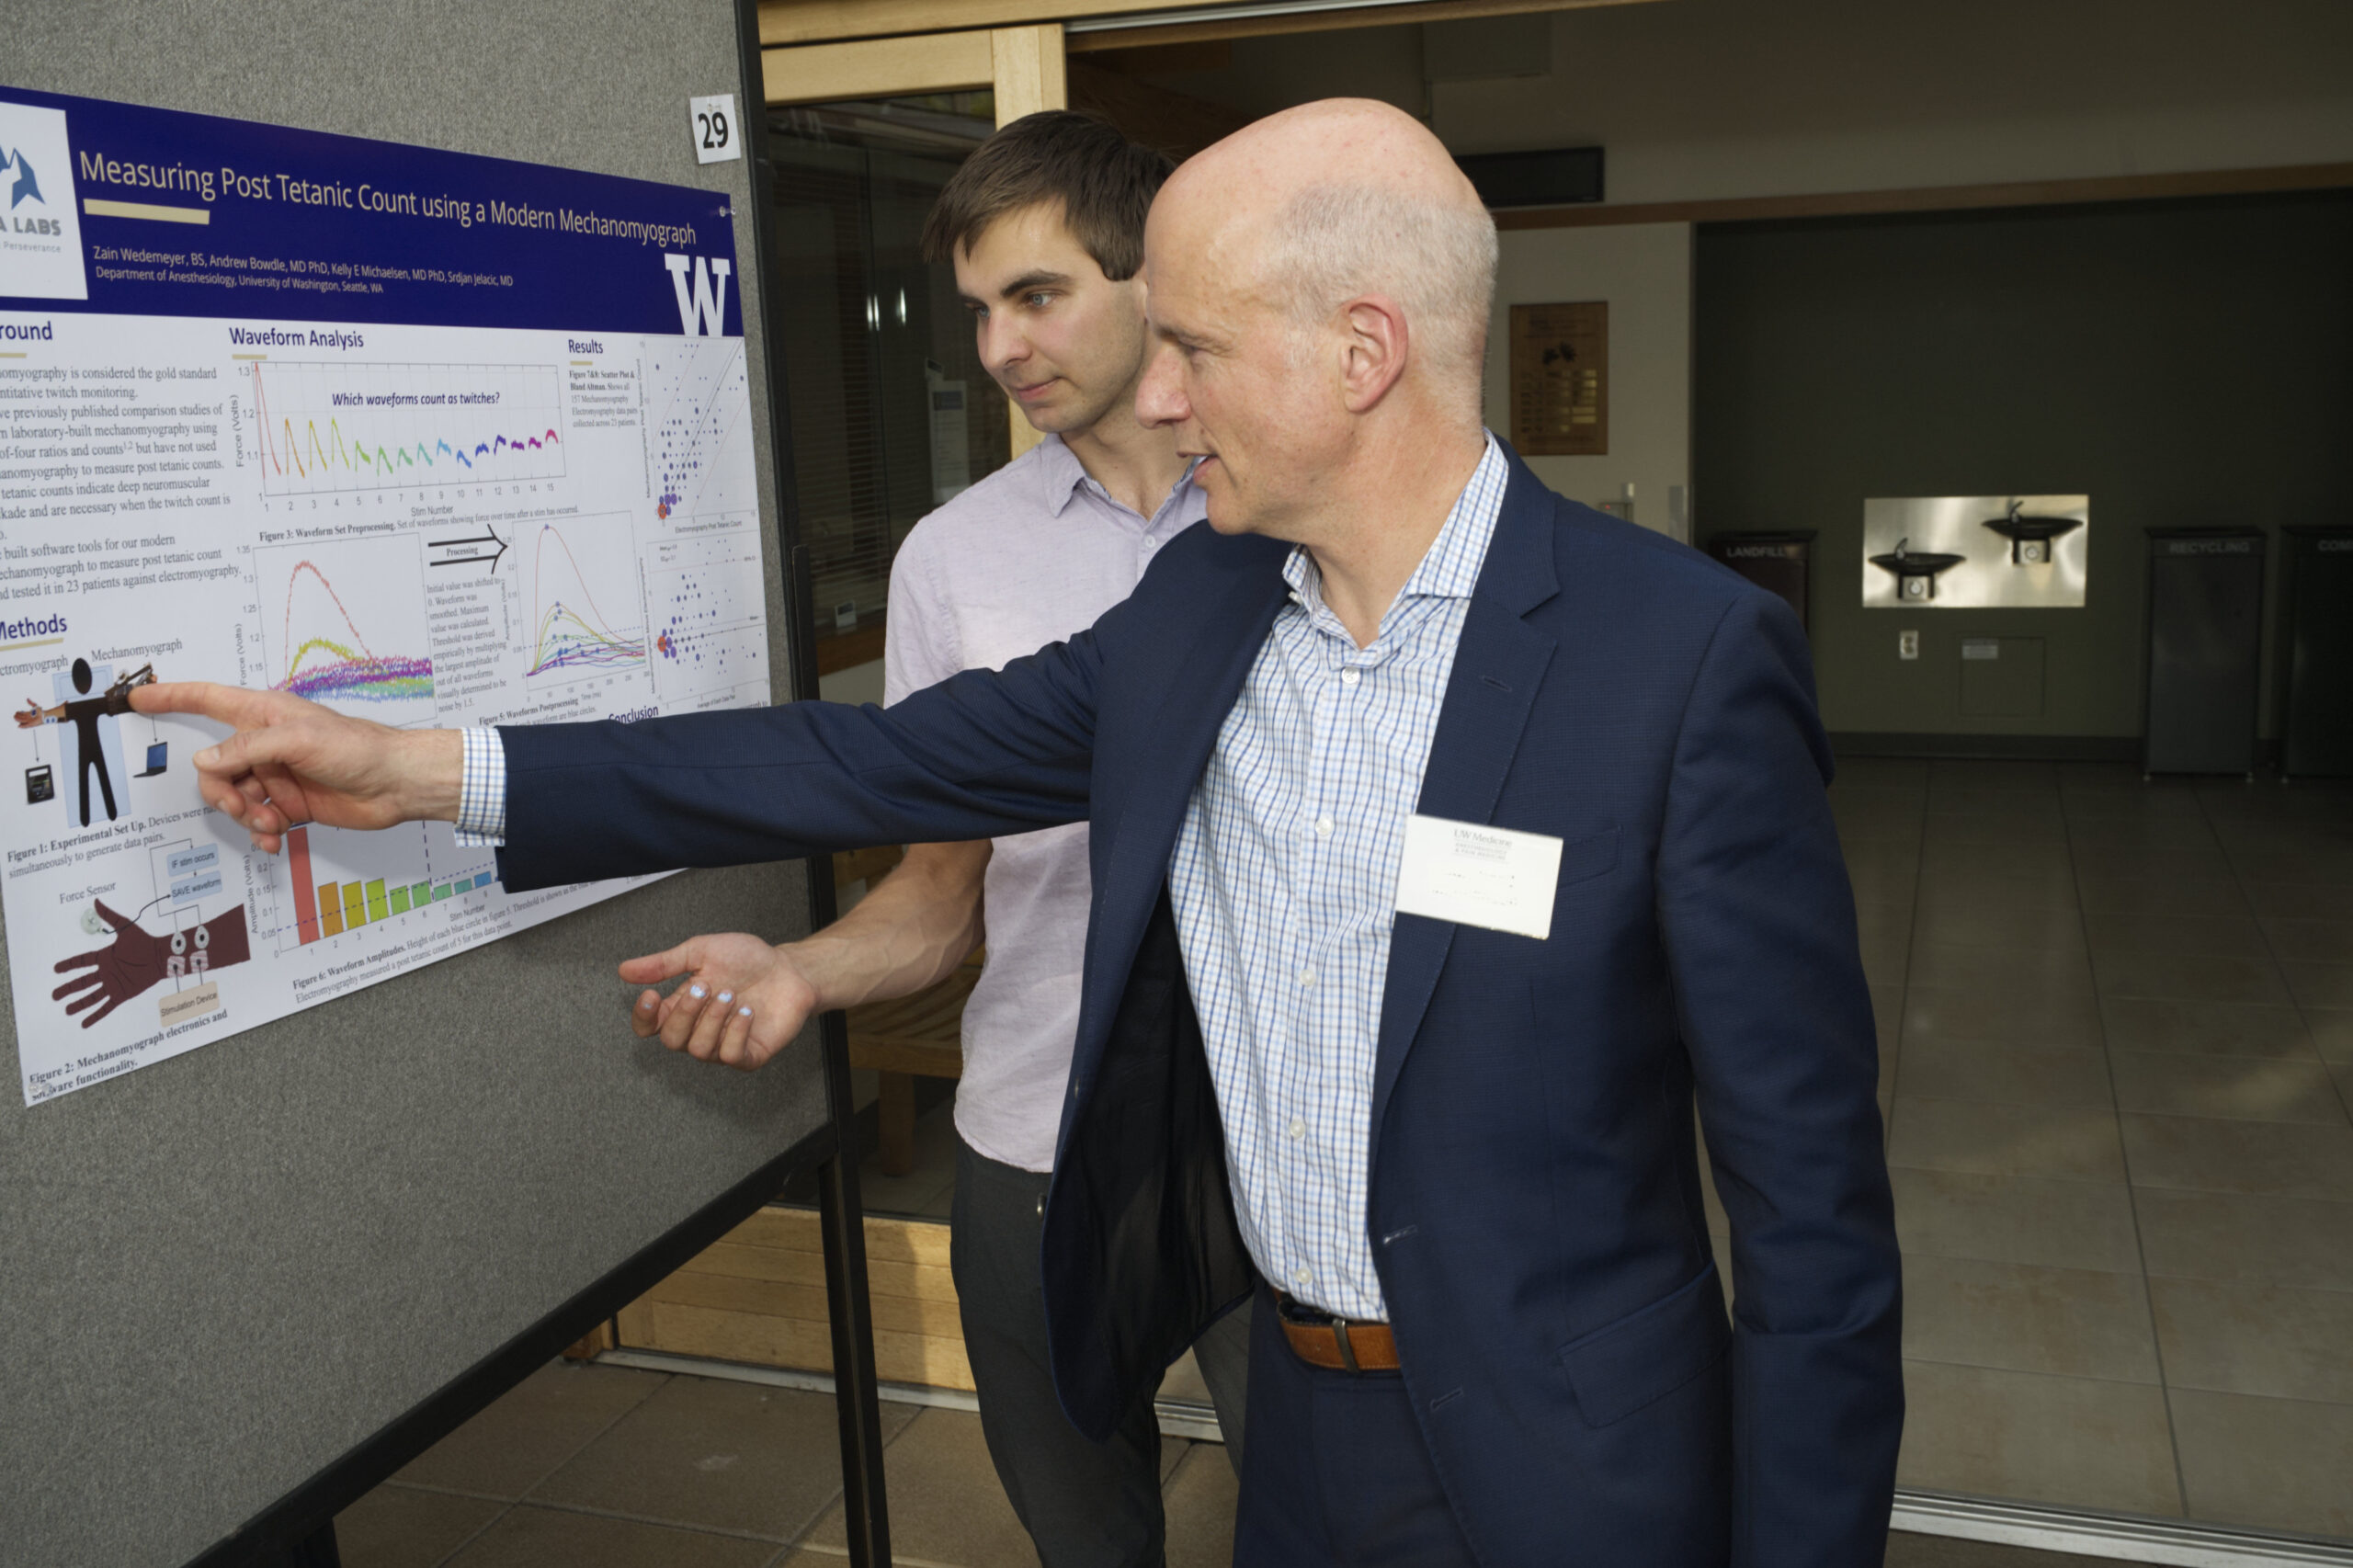 Dr. Mackensen pointing to a science poster